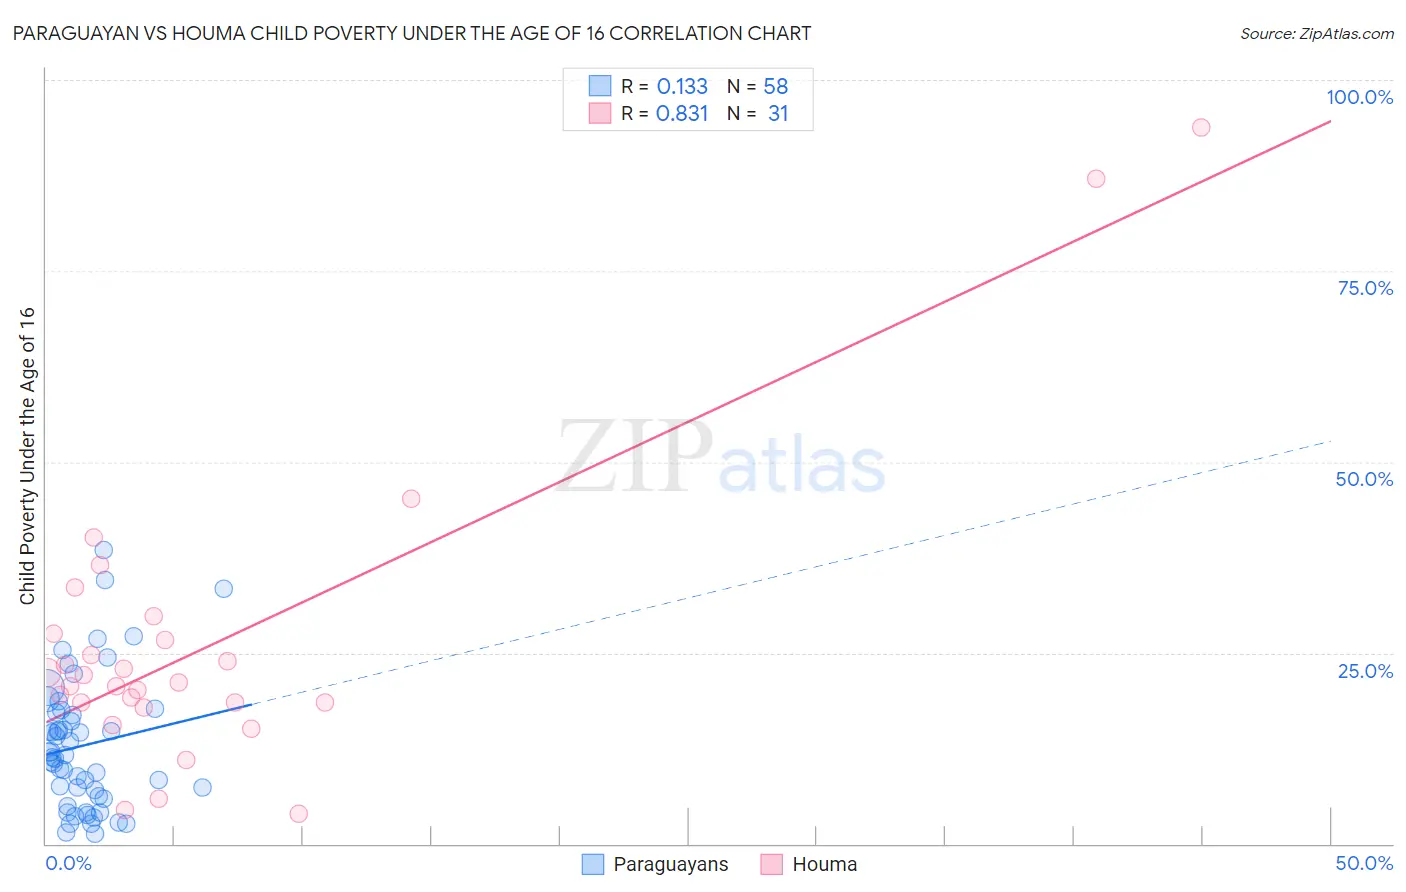 Paraguayan vs Houma Child Poverty Under the Age of 16